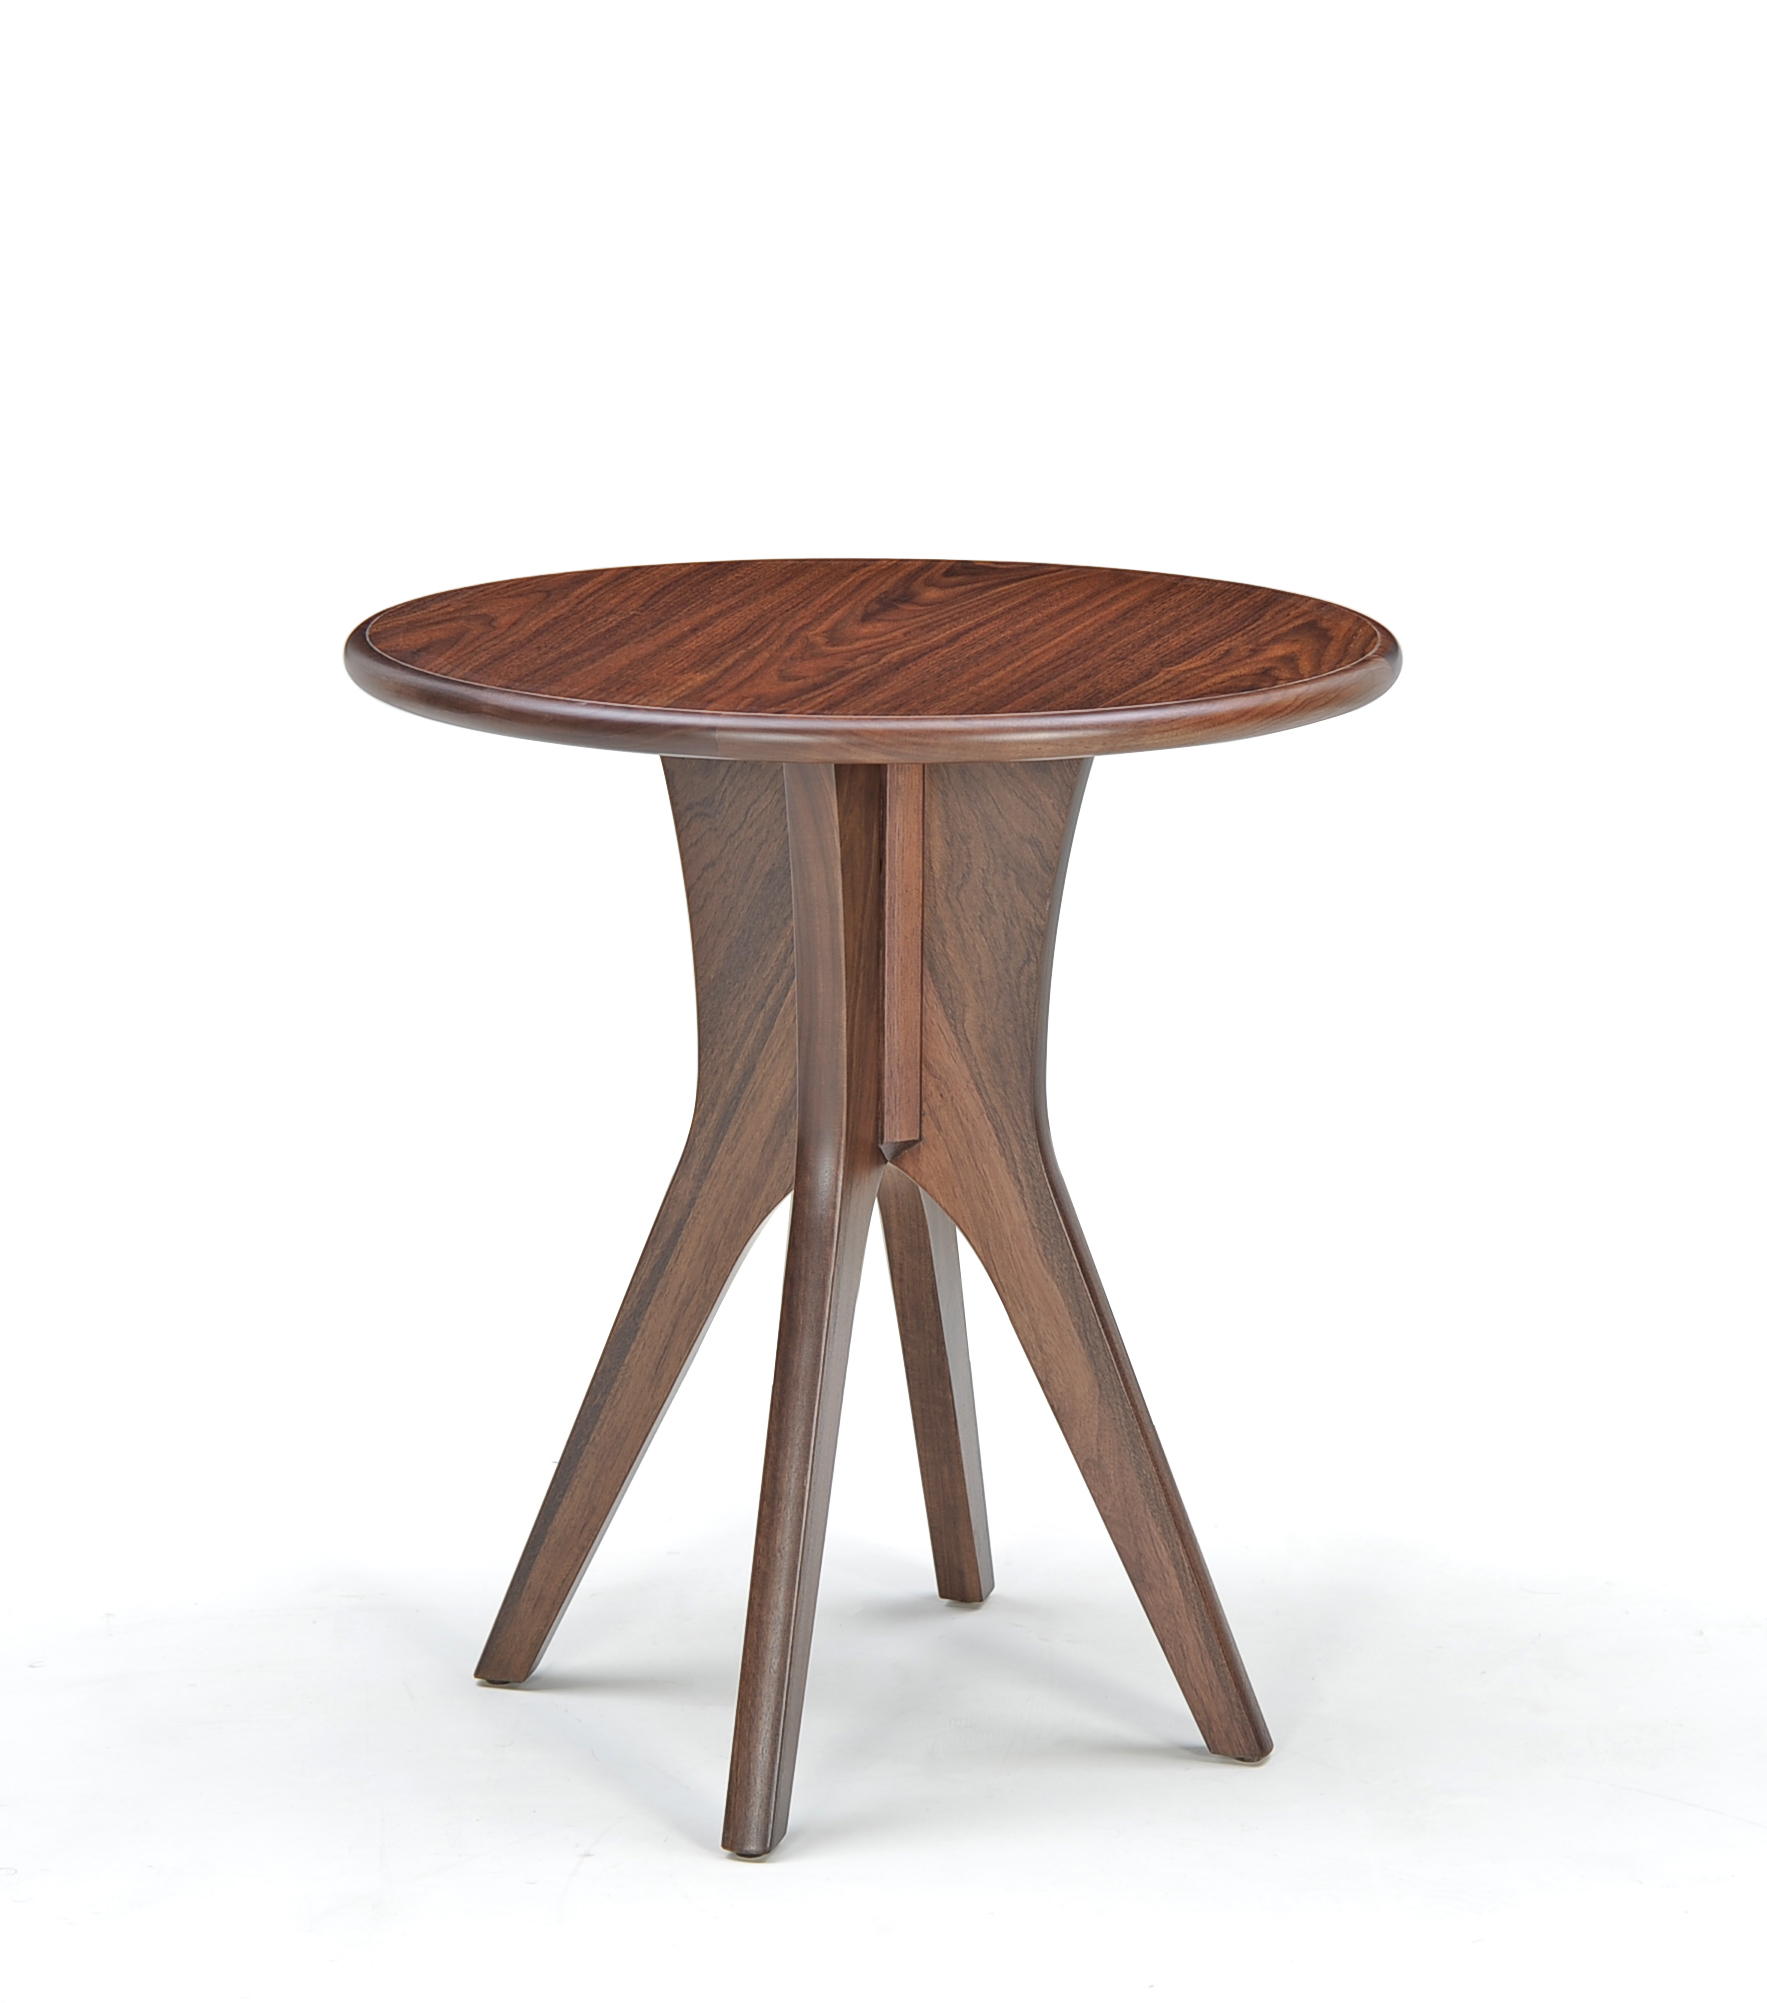 MR-215 Round End Table @ LR